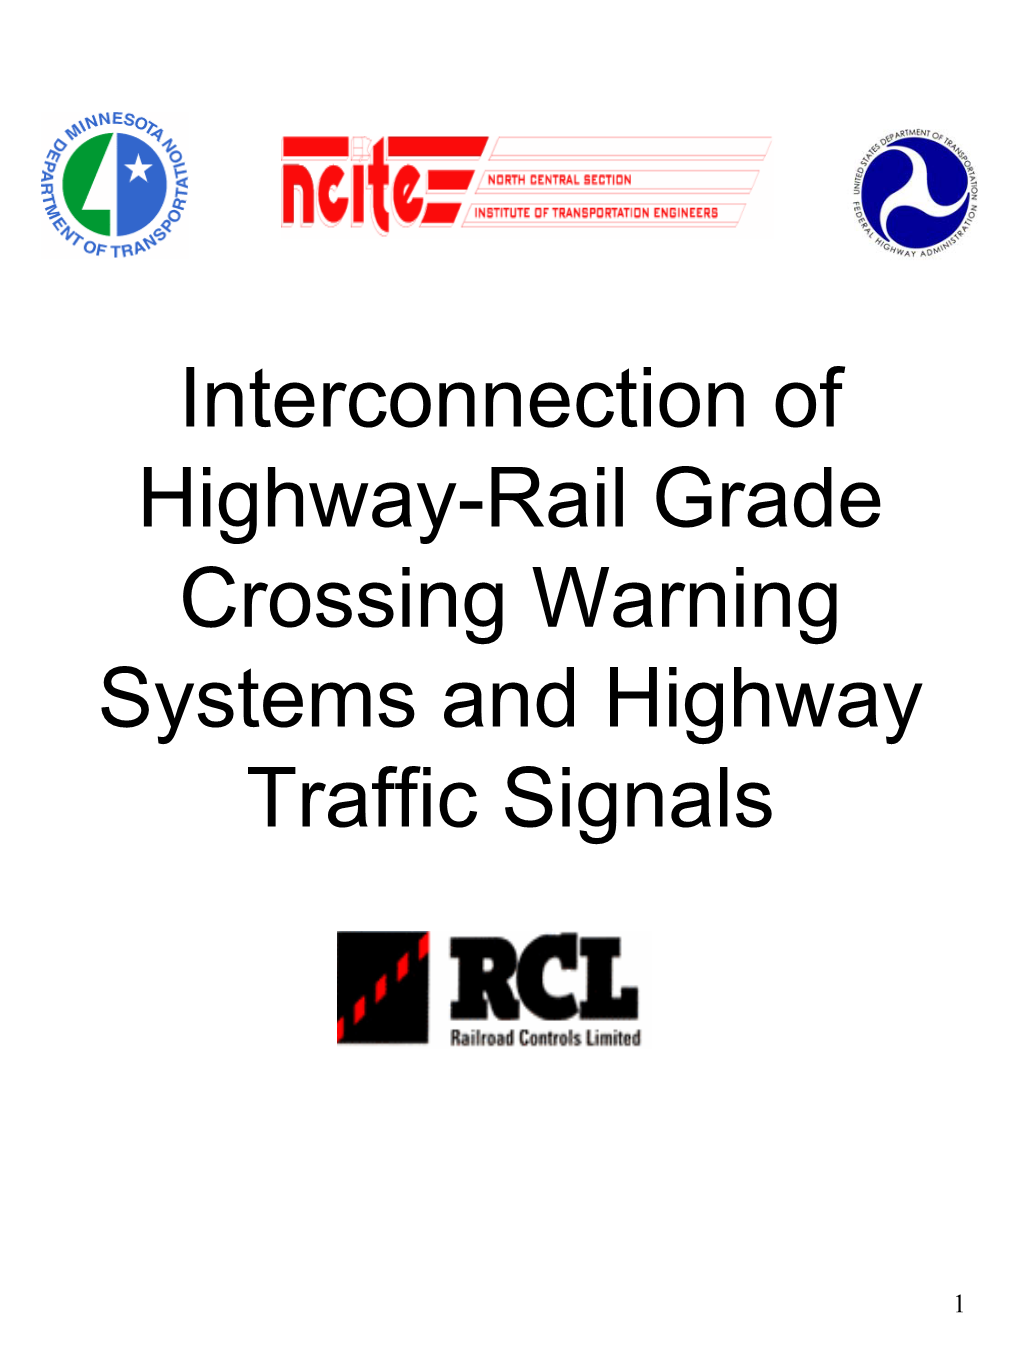 Highway-Rail Crossing Warning Systems and Traffic Signals Manual